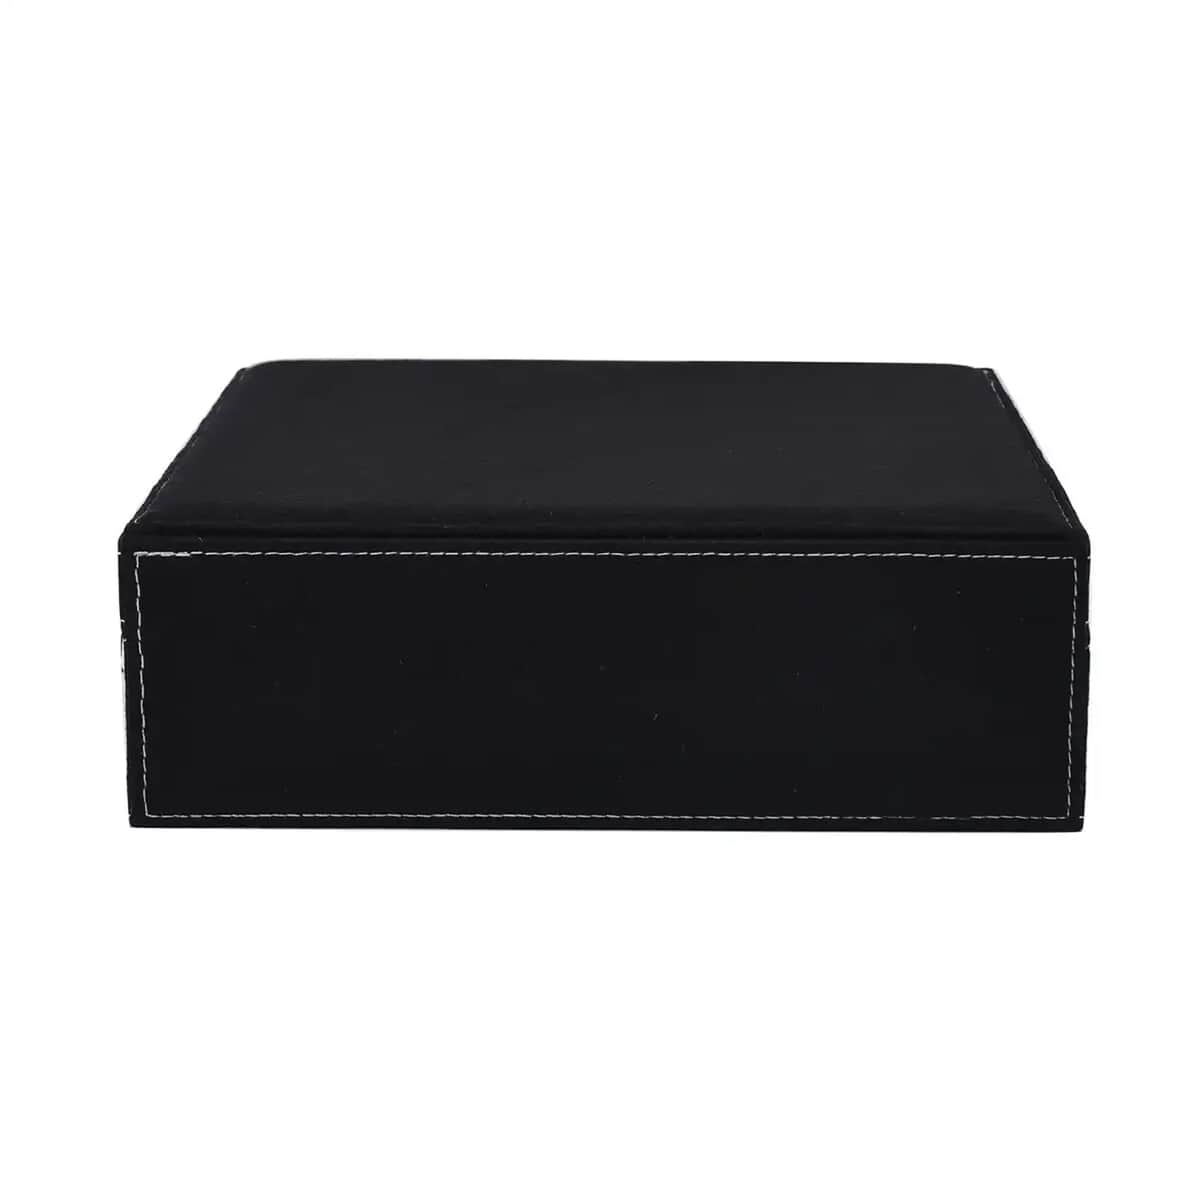 Black Faux Velvet Briefcase Style 2-tier Jewelry Box, Scratch resistant and Anti-Tarnish Jewelry Storage Box, Anti Tarnish Jewelry Case, Jewelry Organizer (Approx 60 Rings, etc.) image number 5